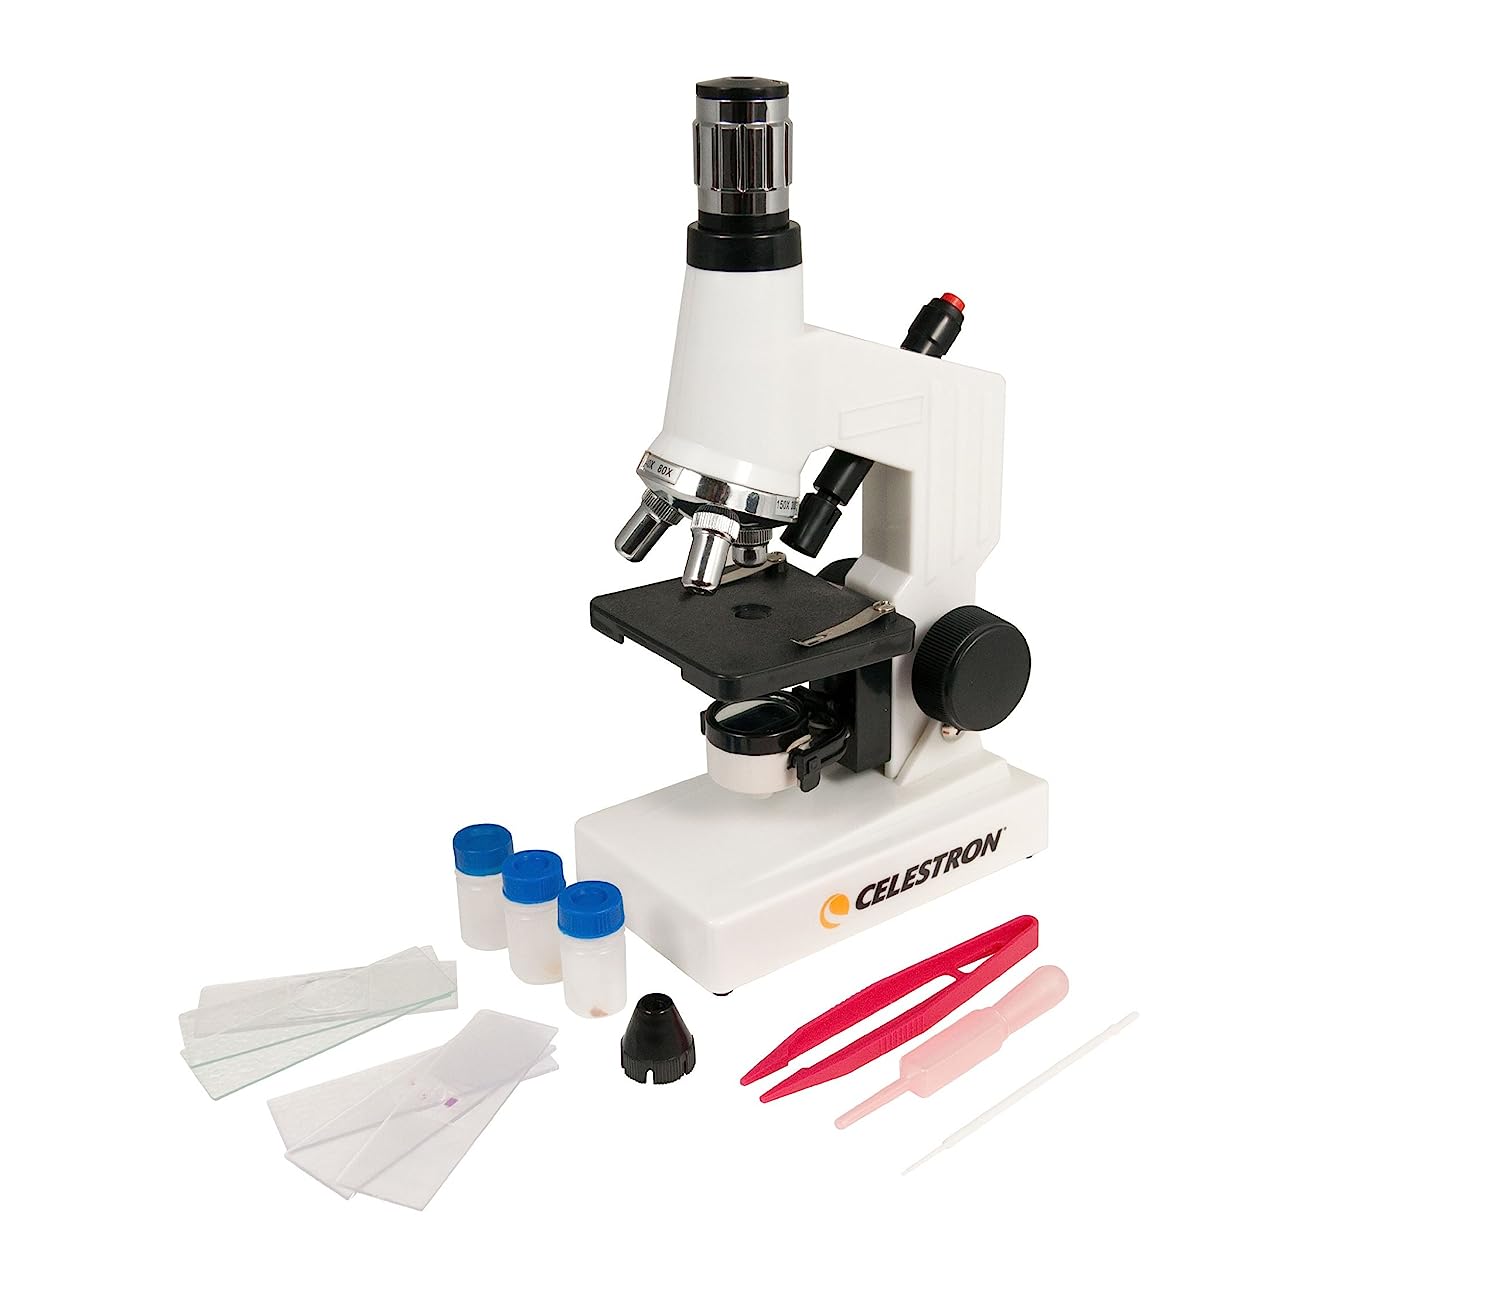 Celestron microscope with powers from 40x to 600x Kit